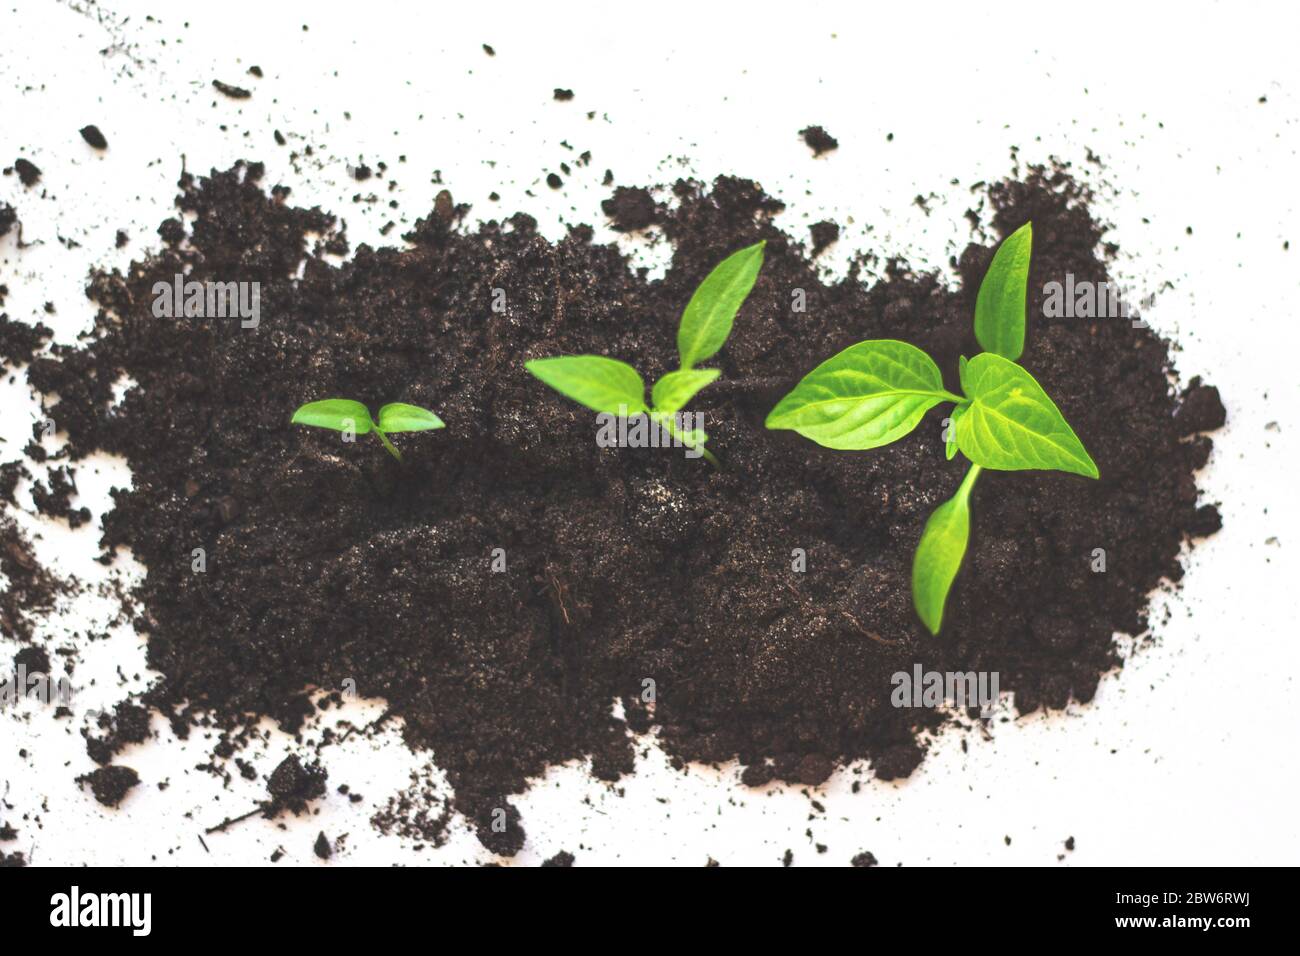 Growth Sequence - A sequence of seedlings growing progressively taller, isolated against a white background. Pumpkin seedlings are growing from the so Stock Photo